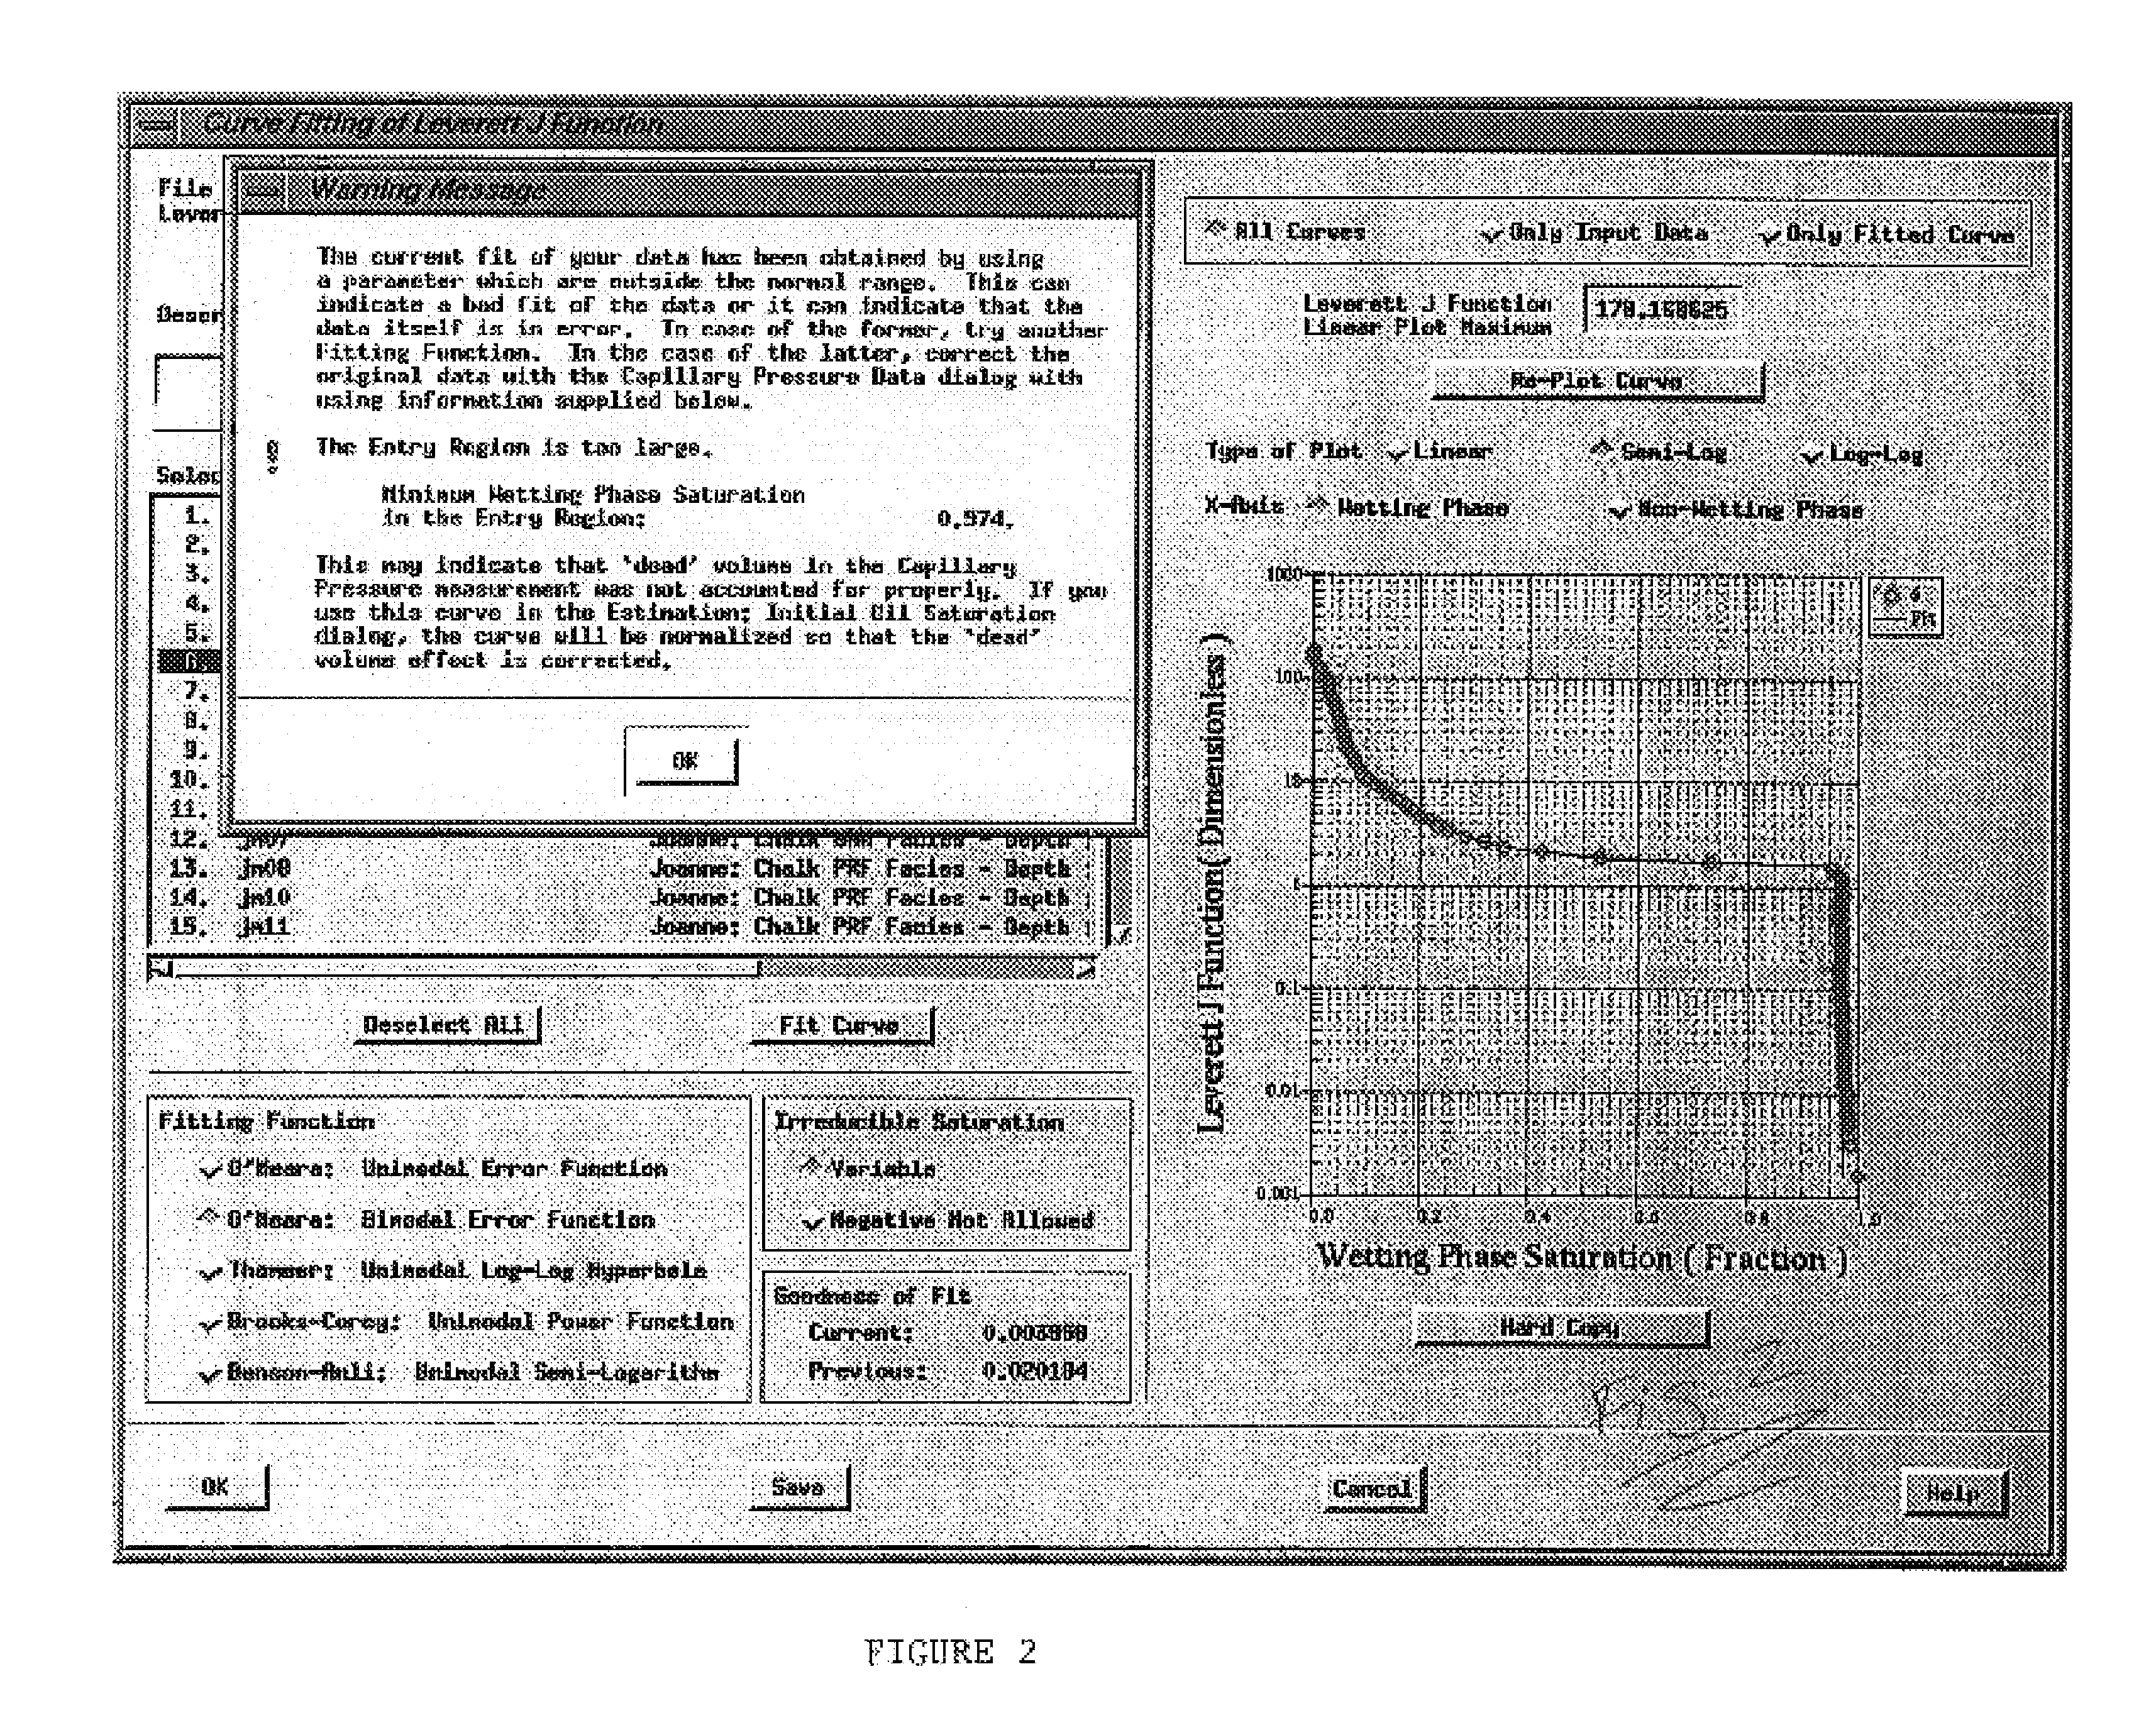 Method for determining reservoir fluid volumes, fluid contacts, compartmentalization, and permeability in geological subsurface models